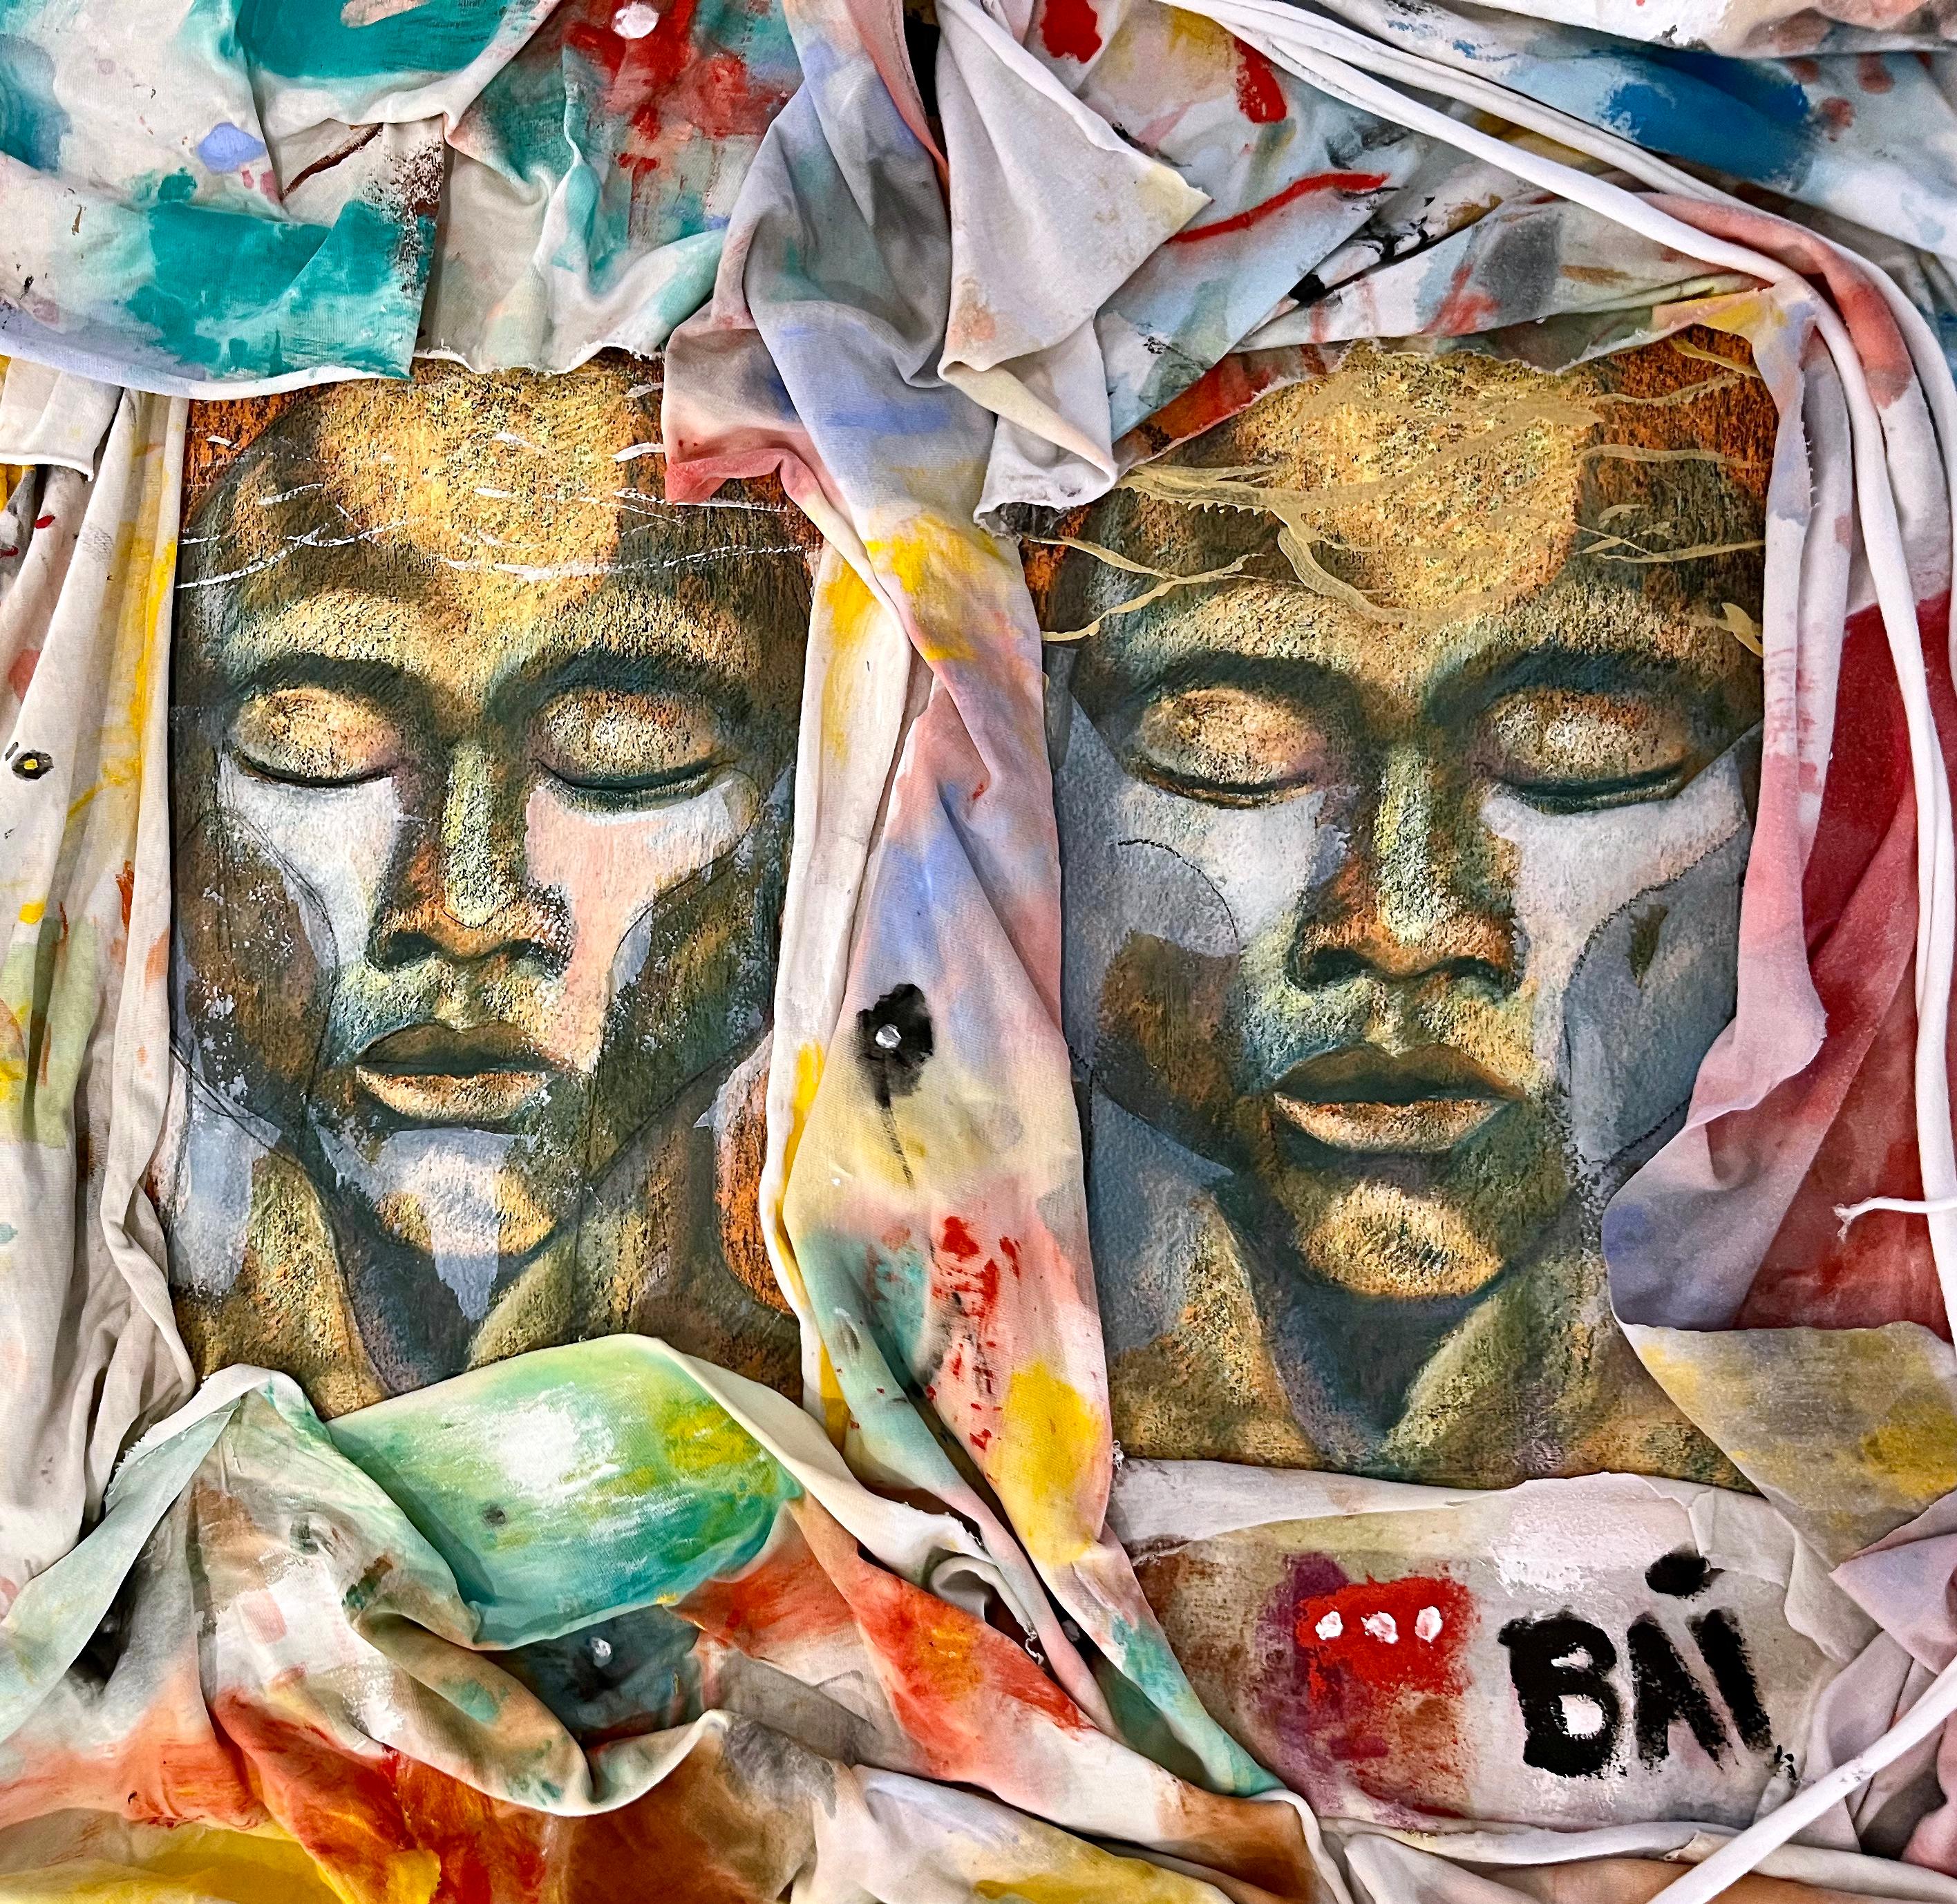 The Three Wisemen, 2022 by Carl Karni-Bain (Bai) is a contemporary mixed-media original fabric work. The piece 3 wisemen, portraits on watercolor paper, are embellished with pastel and charcoal, acrylic paint, and layers of painted fabric. The piece